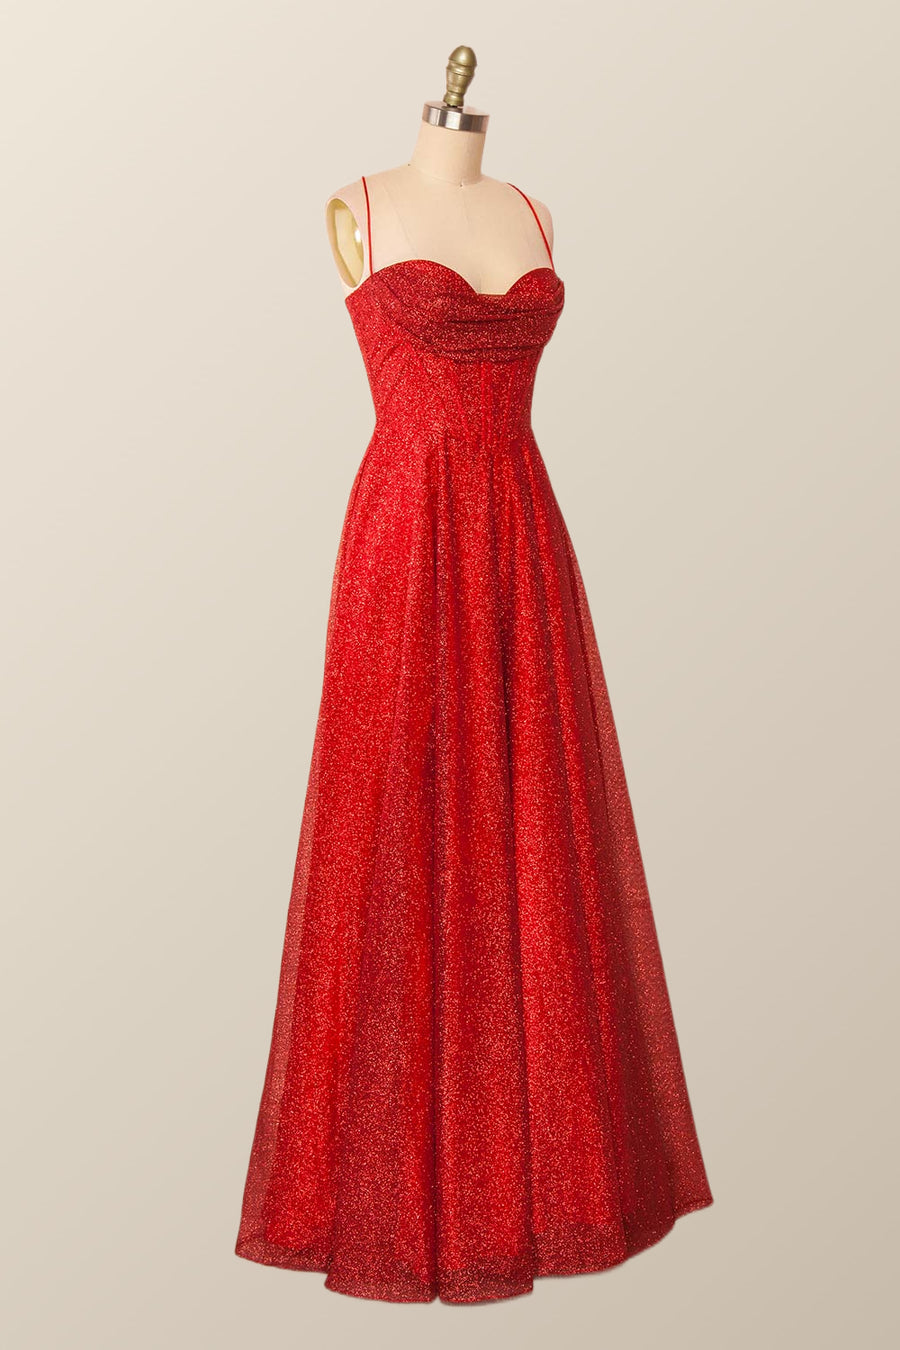 Cowl Neck Red A-line Long Formal Dress